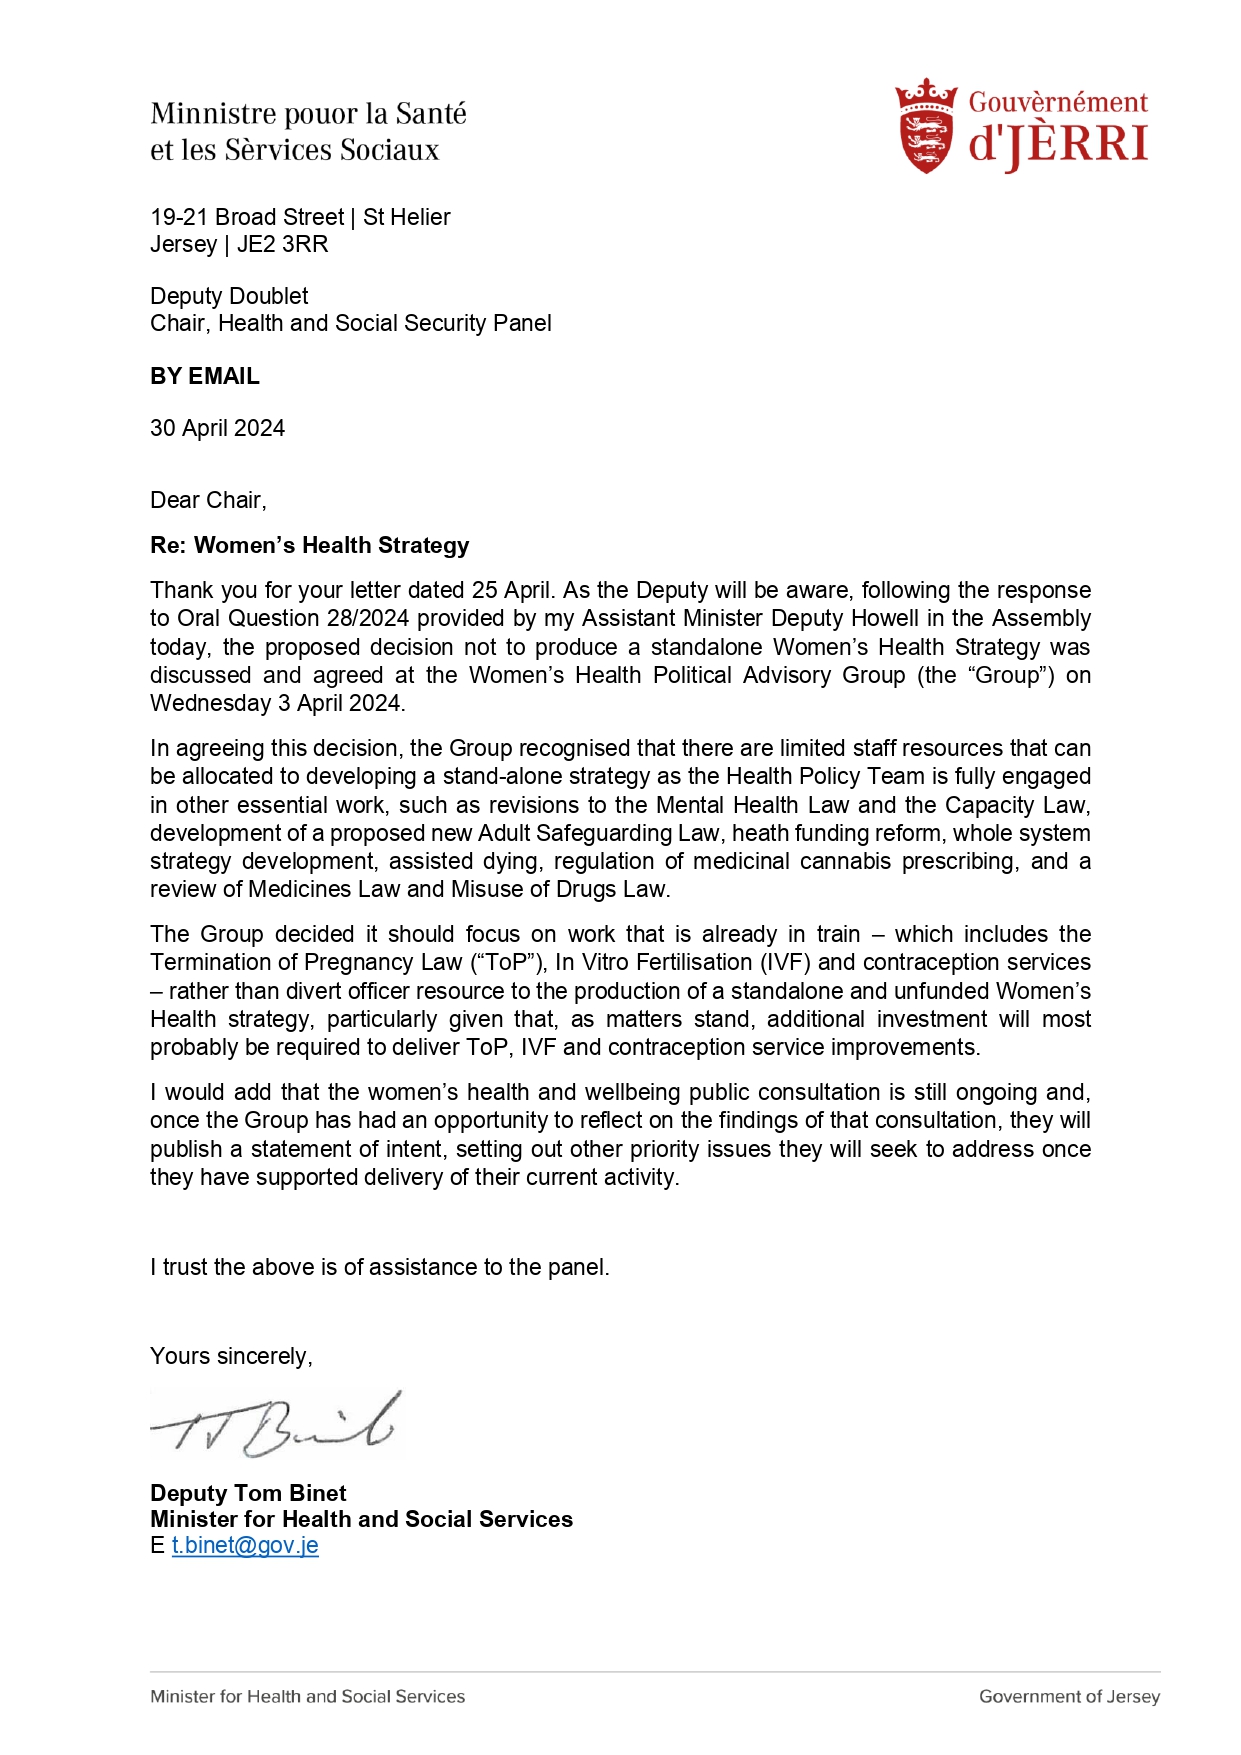 letter_-_from_minister_for_health_and_social_services_to_hss_panel_re_womens_health_strategy_-_30_april_2024_page-0001.jpg